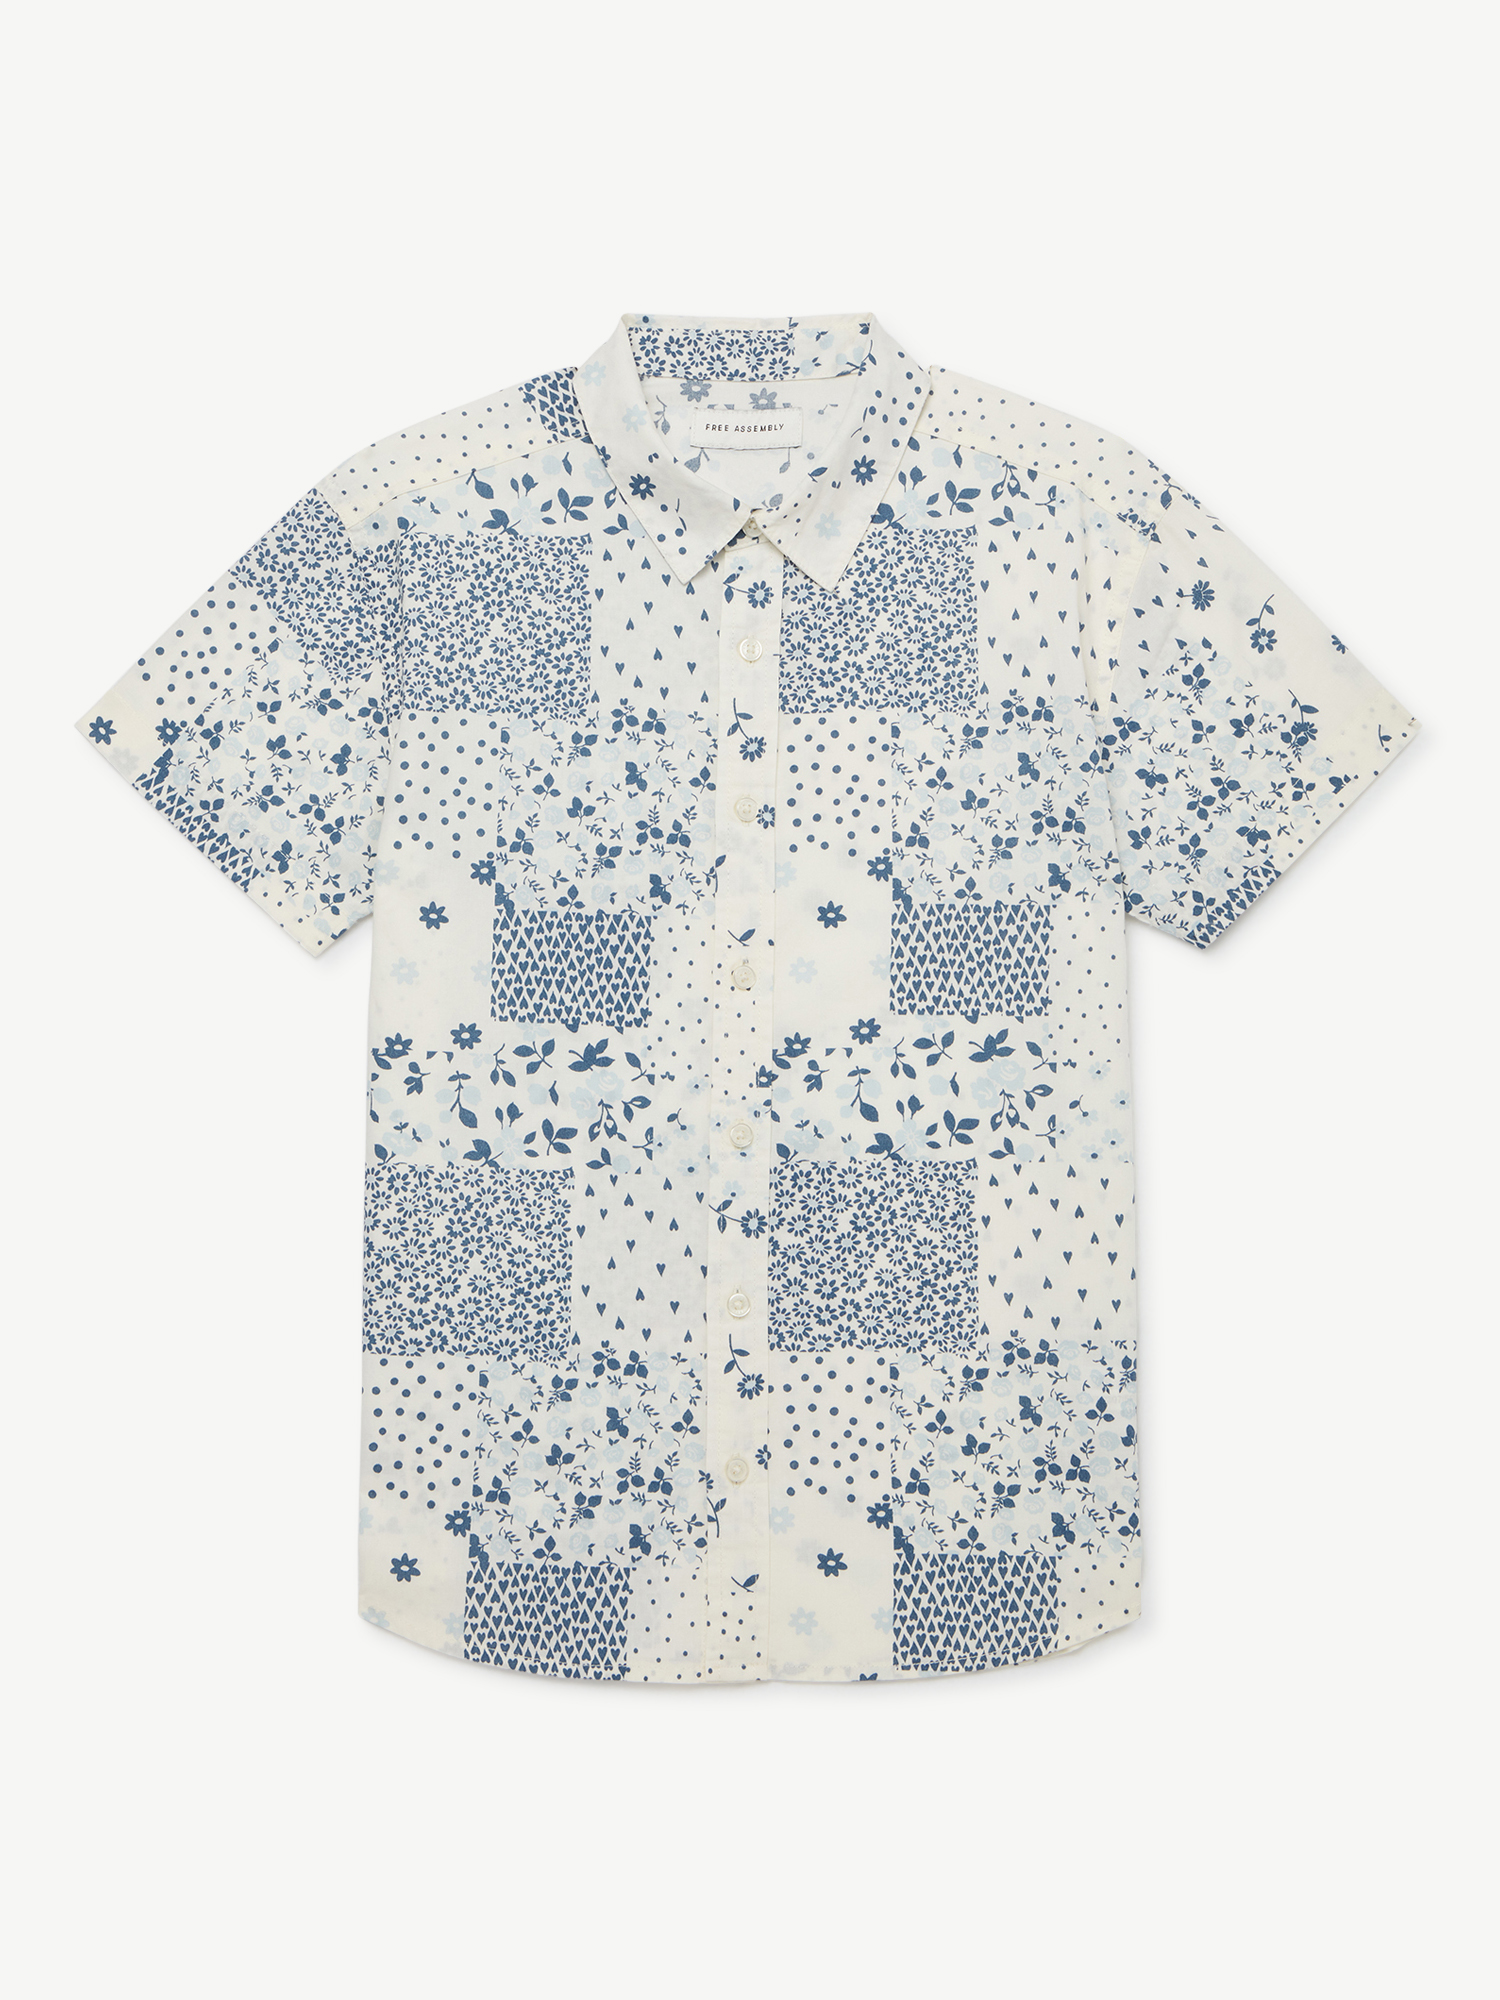 Free Assembly Boys Floral Print Button Down Shirt, Sizes 4-18 - image 5 of 5